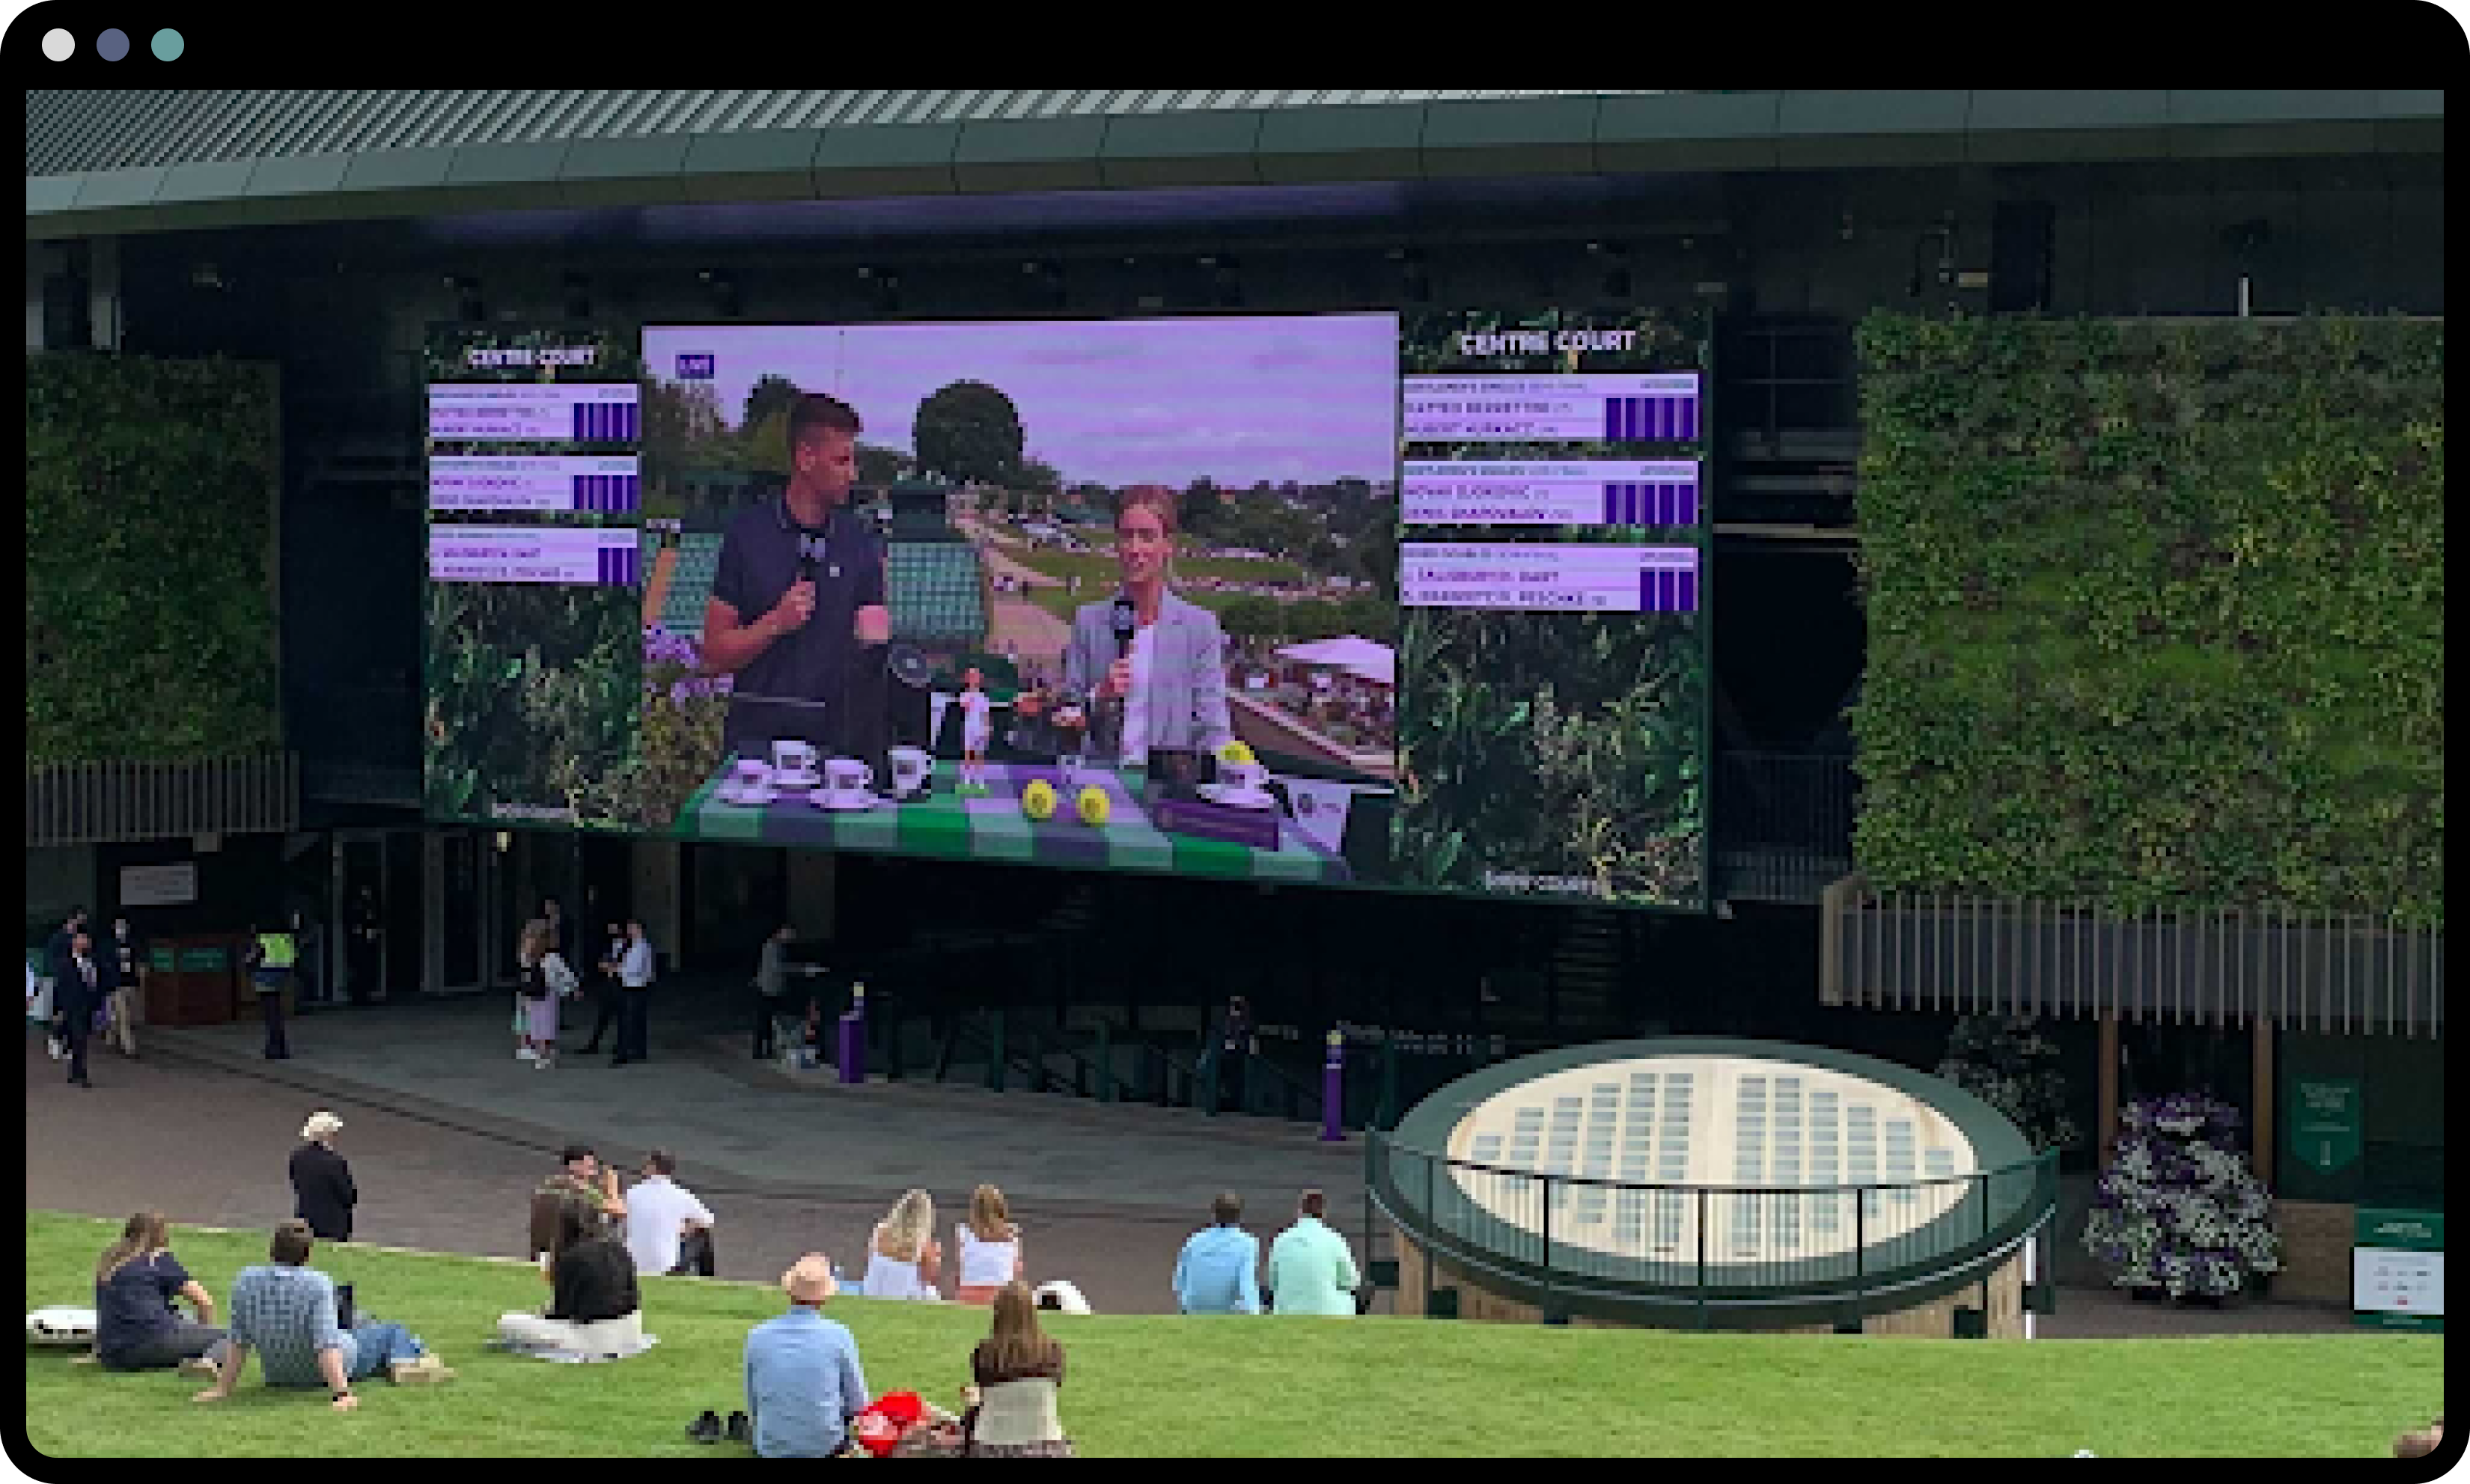 The Championships 2022 at Wimbledon Video production, marking tradition and looking ahead